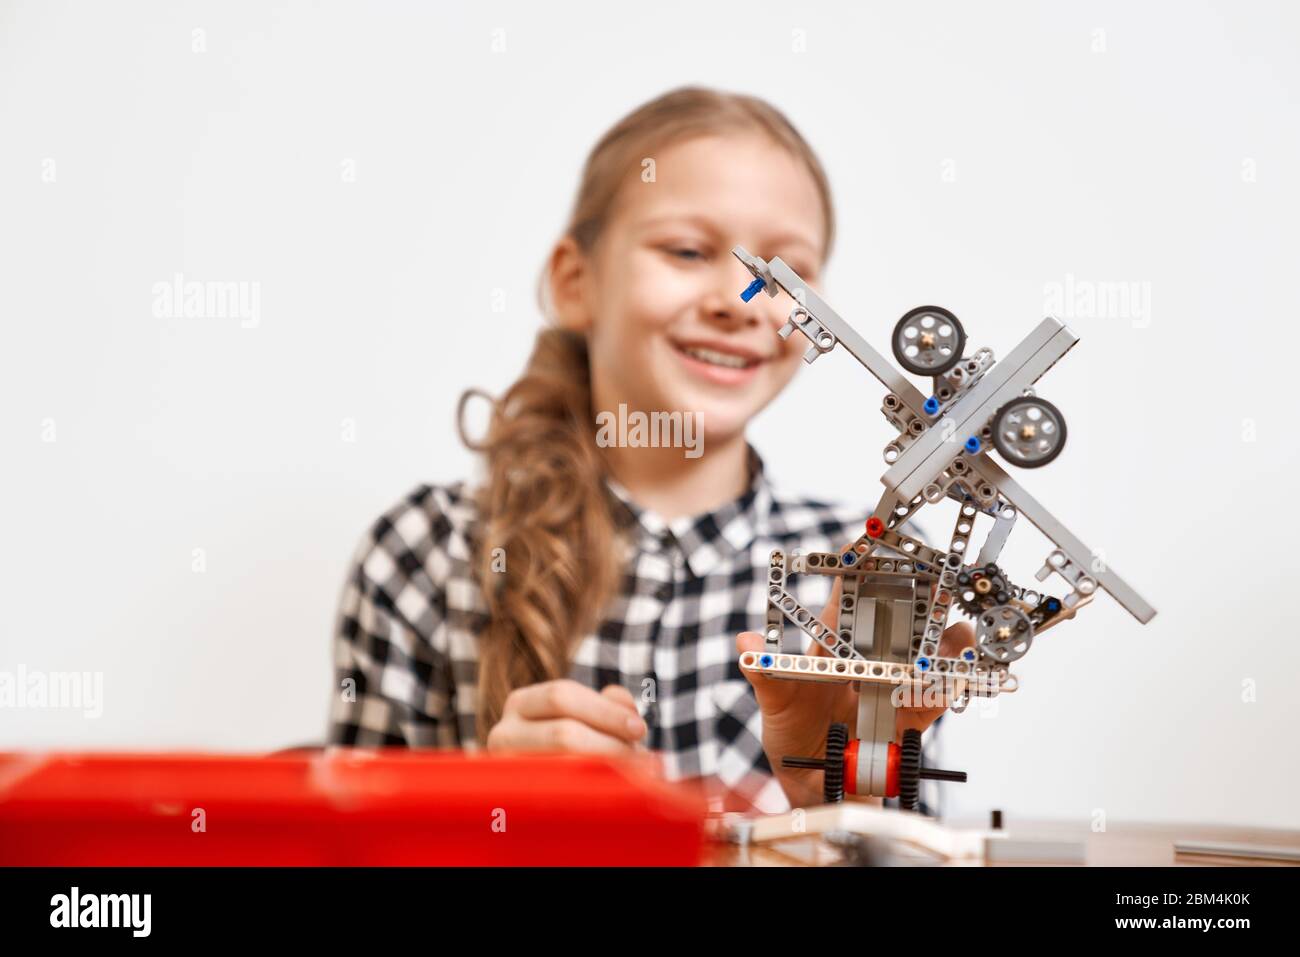 Selective focus of interesting robot in hands of young smiling girl sitting at table. Close up of vehicle made using building kit fo children. Concept of science engineering. Stock Photo